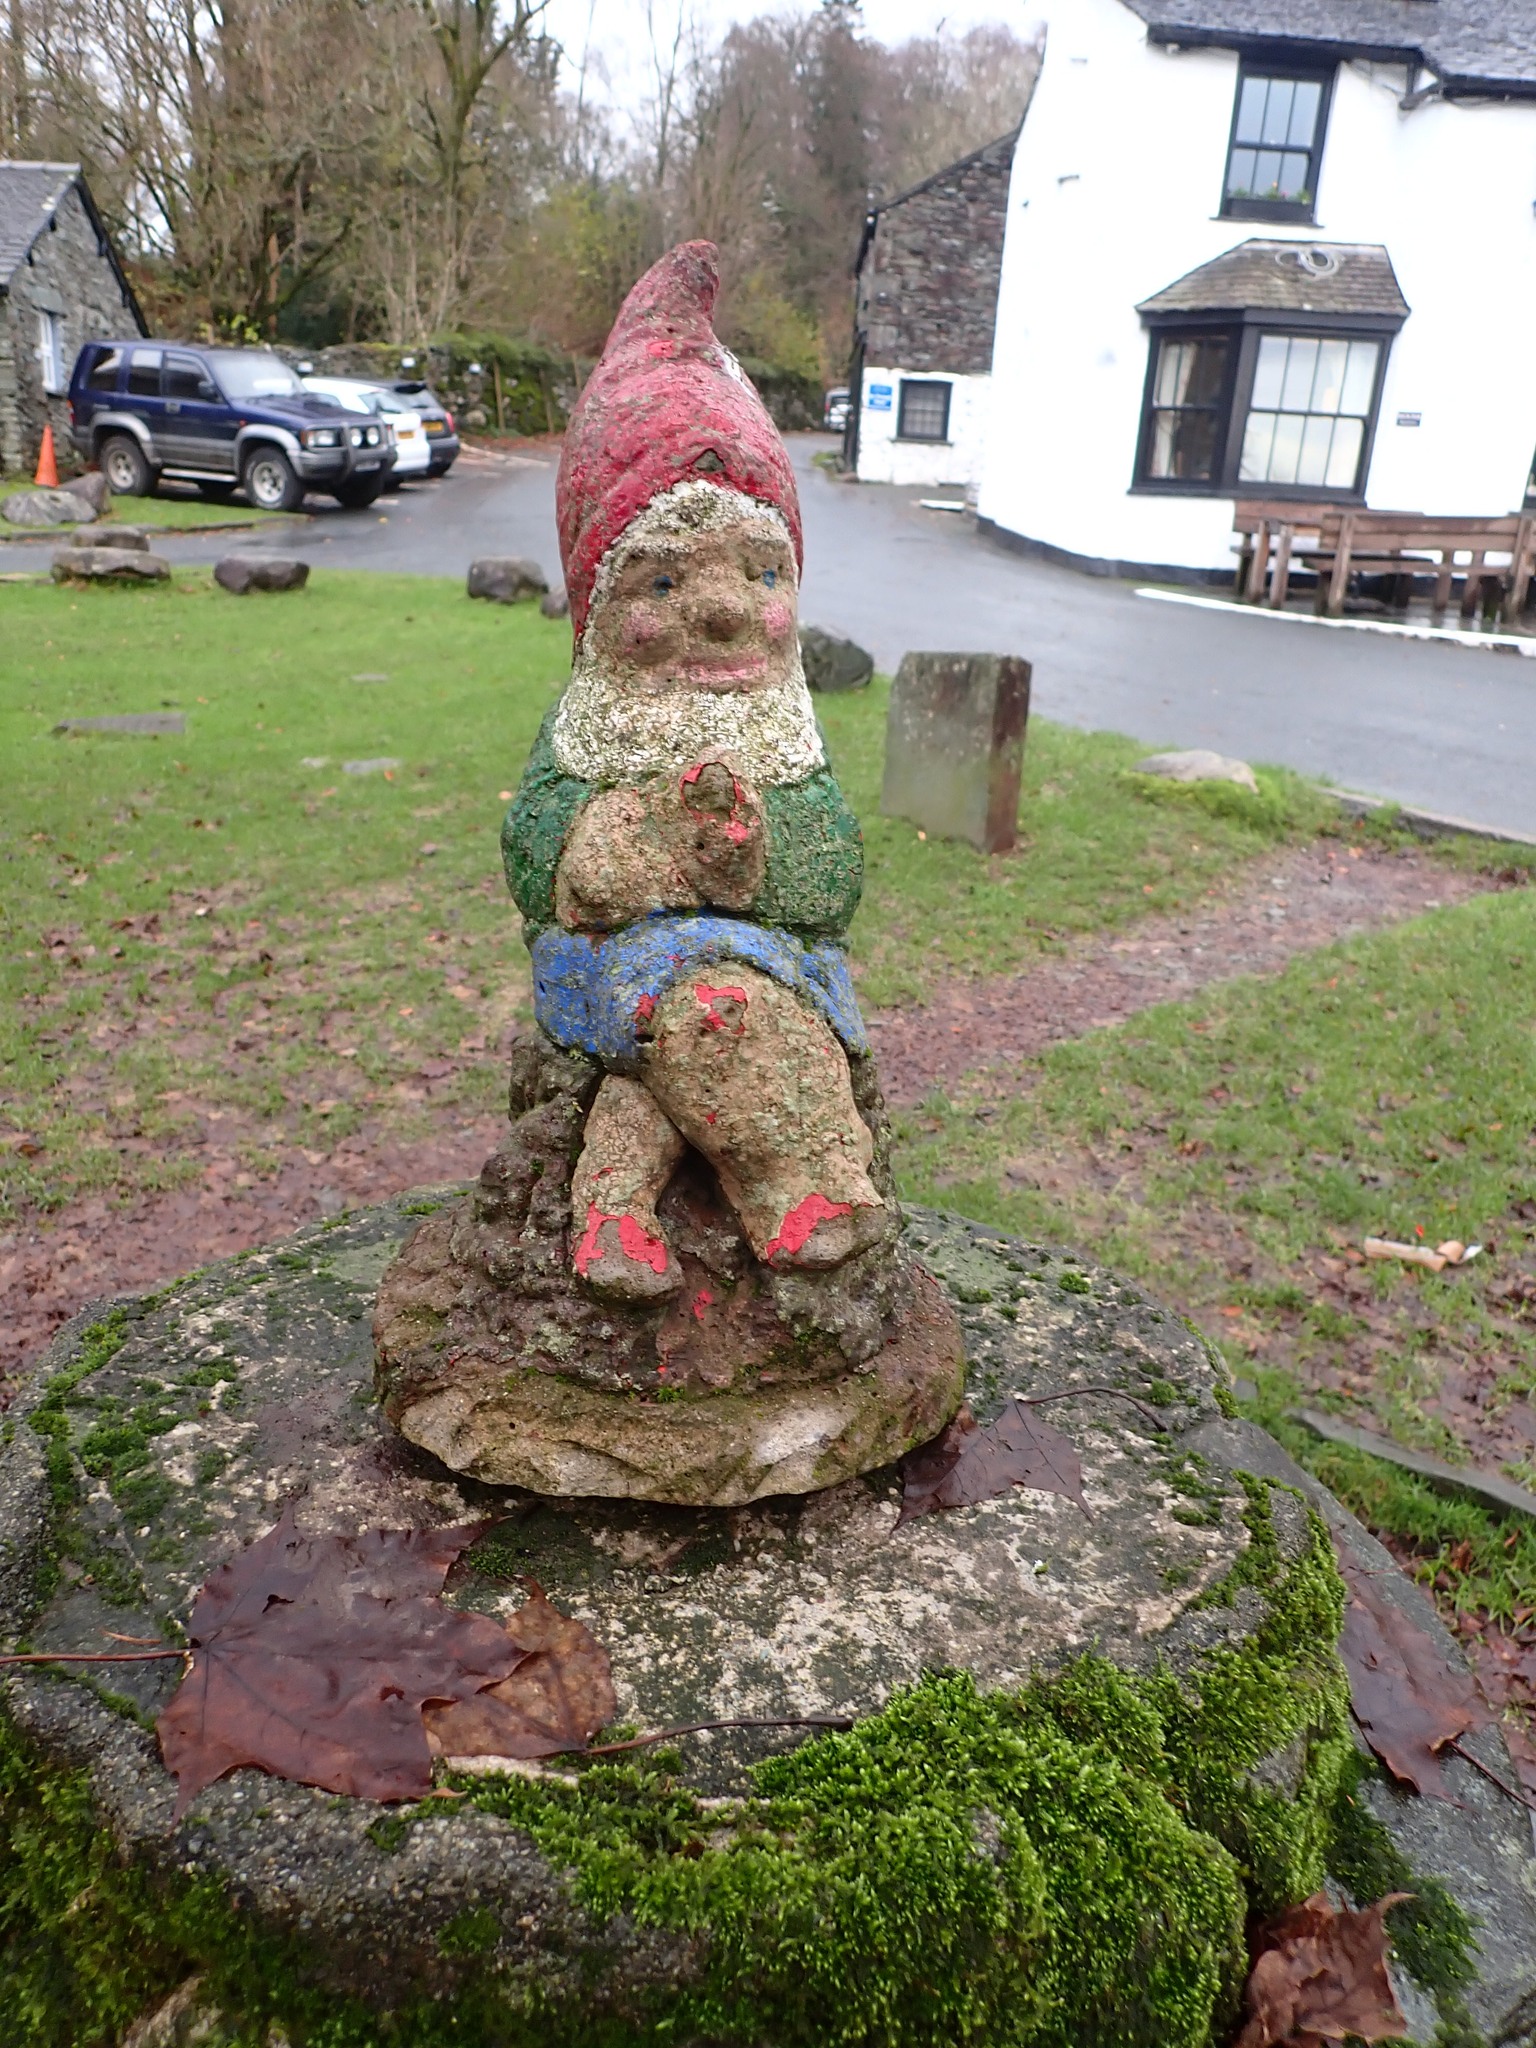 The gnome by our meeting point in Elterwater. There's Lecidella scabra on his plinth.